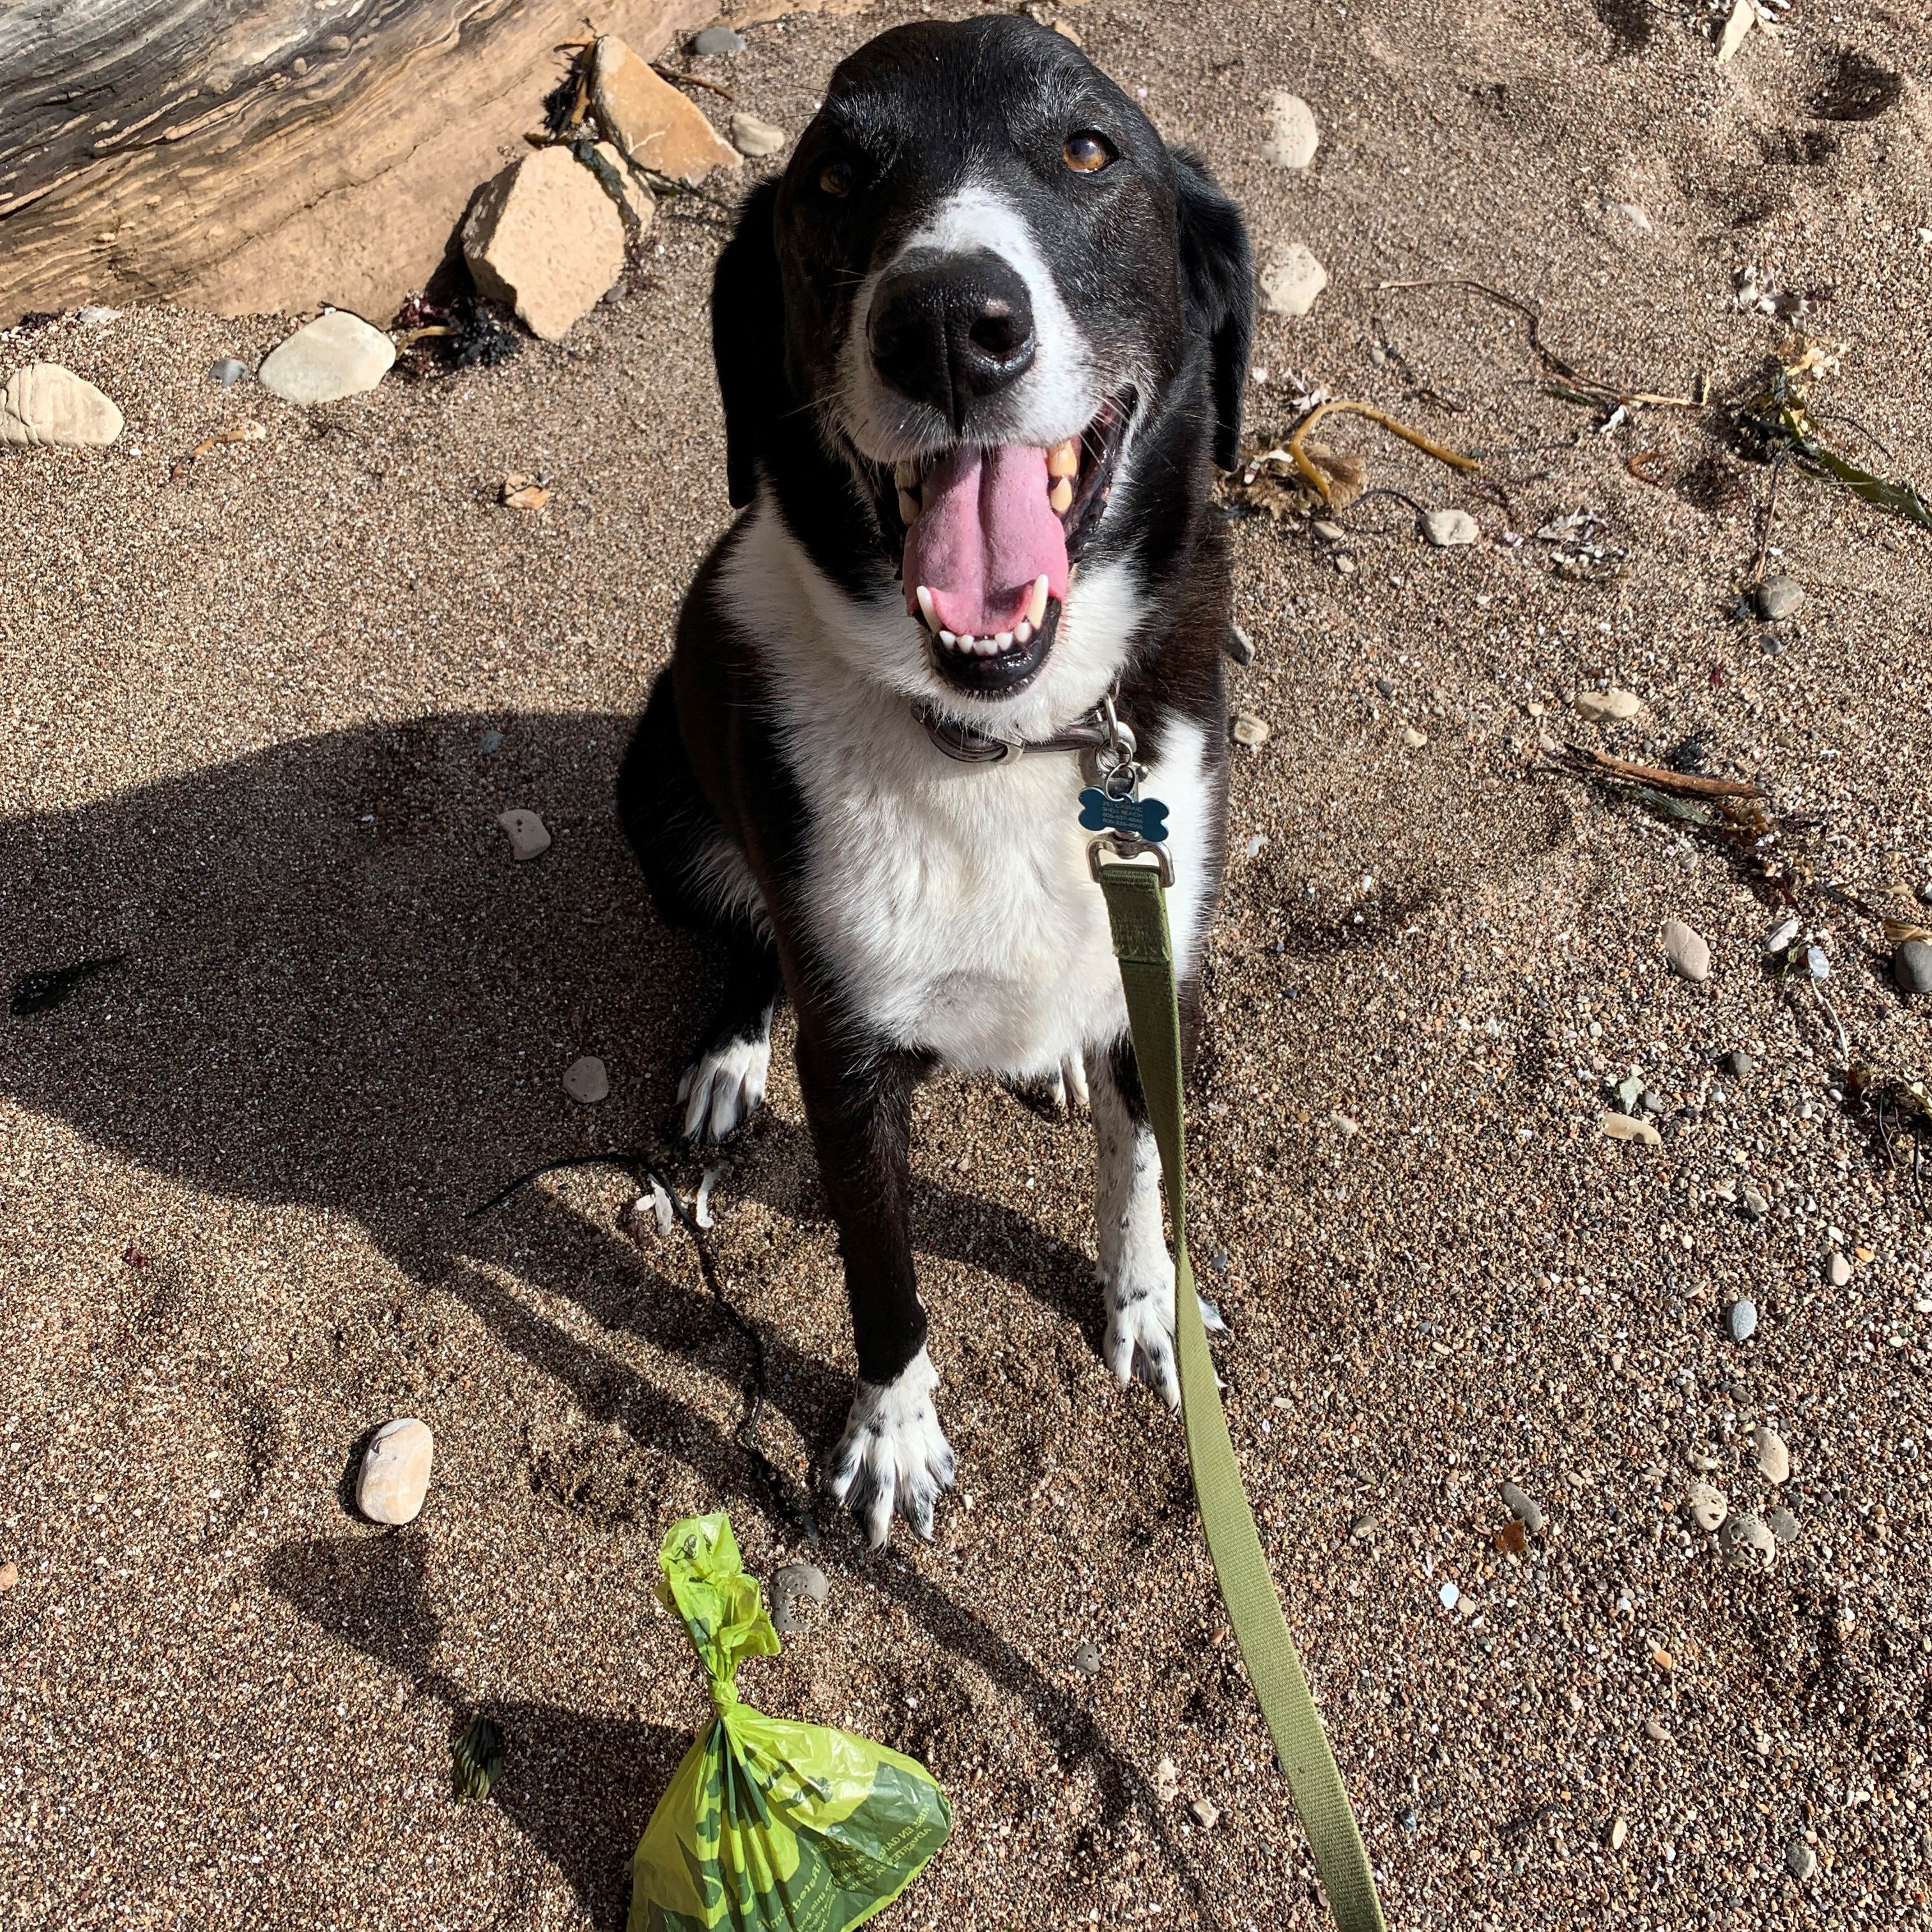 Black and white dog smiling with leash on and green bag of poop on ground besides it